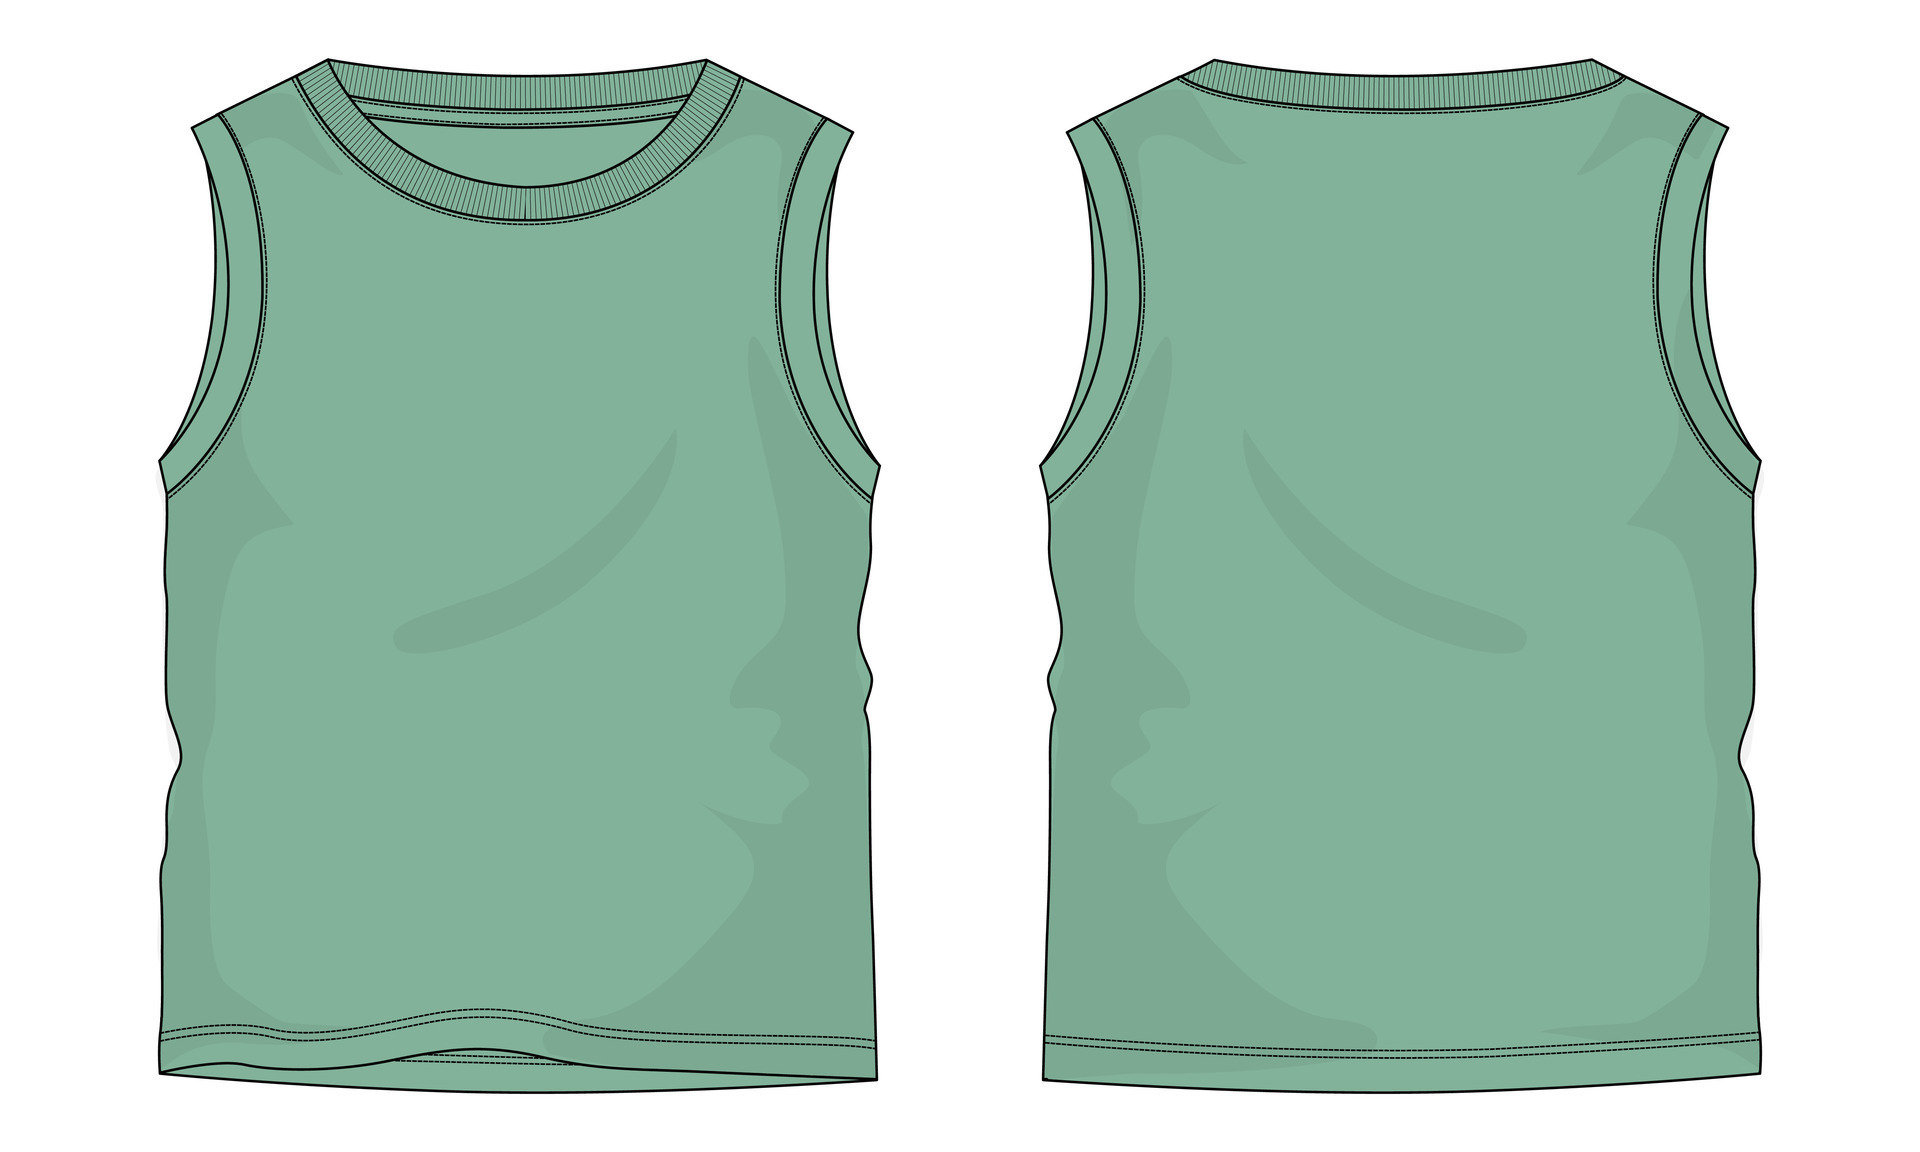 Tank tops Technical drawing fashion flat sketch vector illustration ...